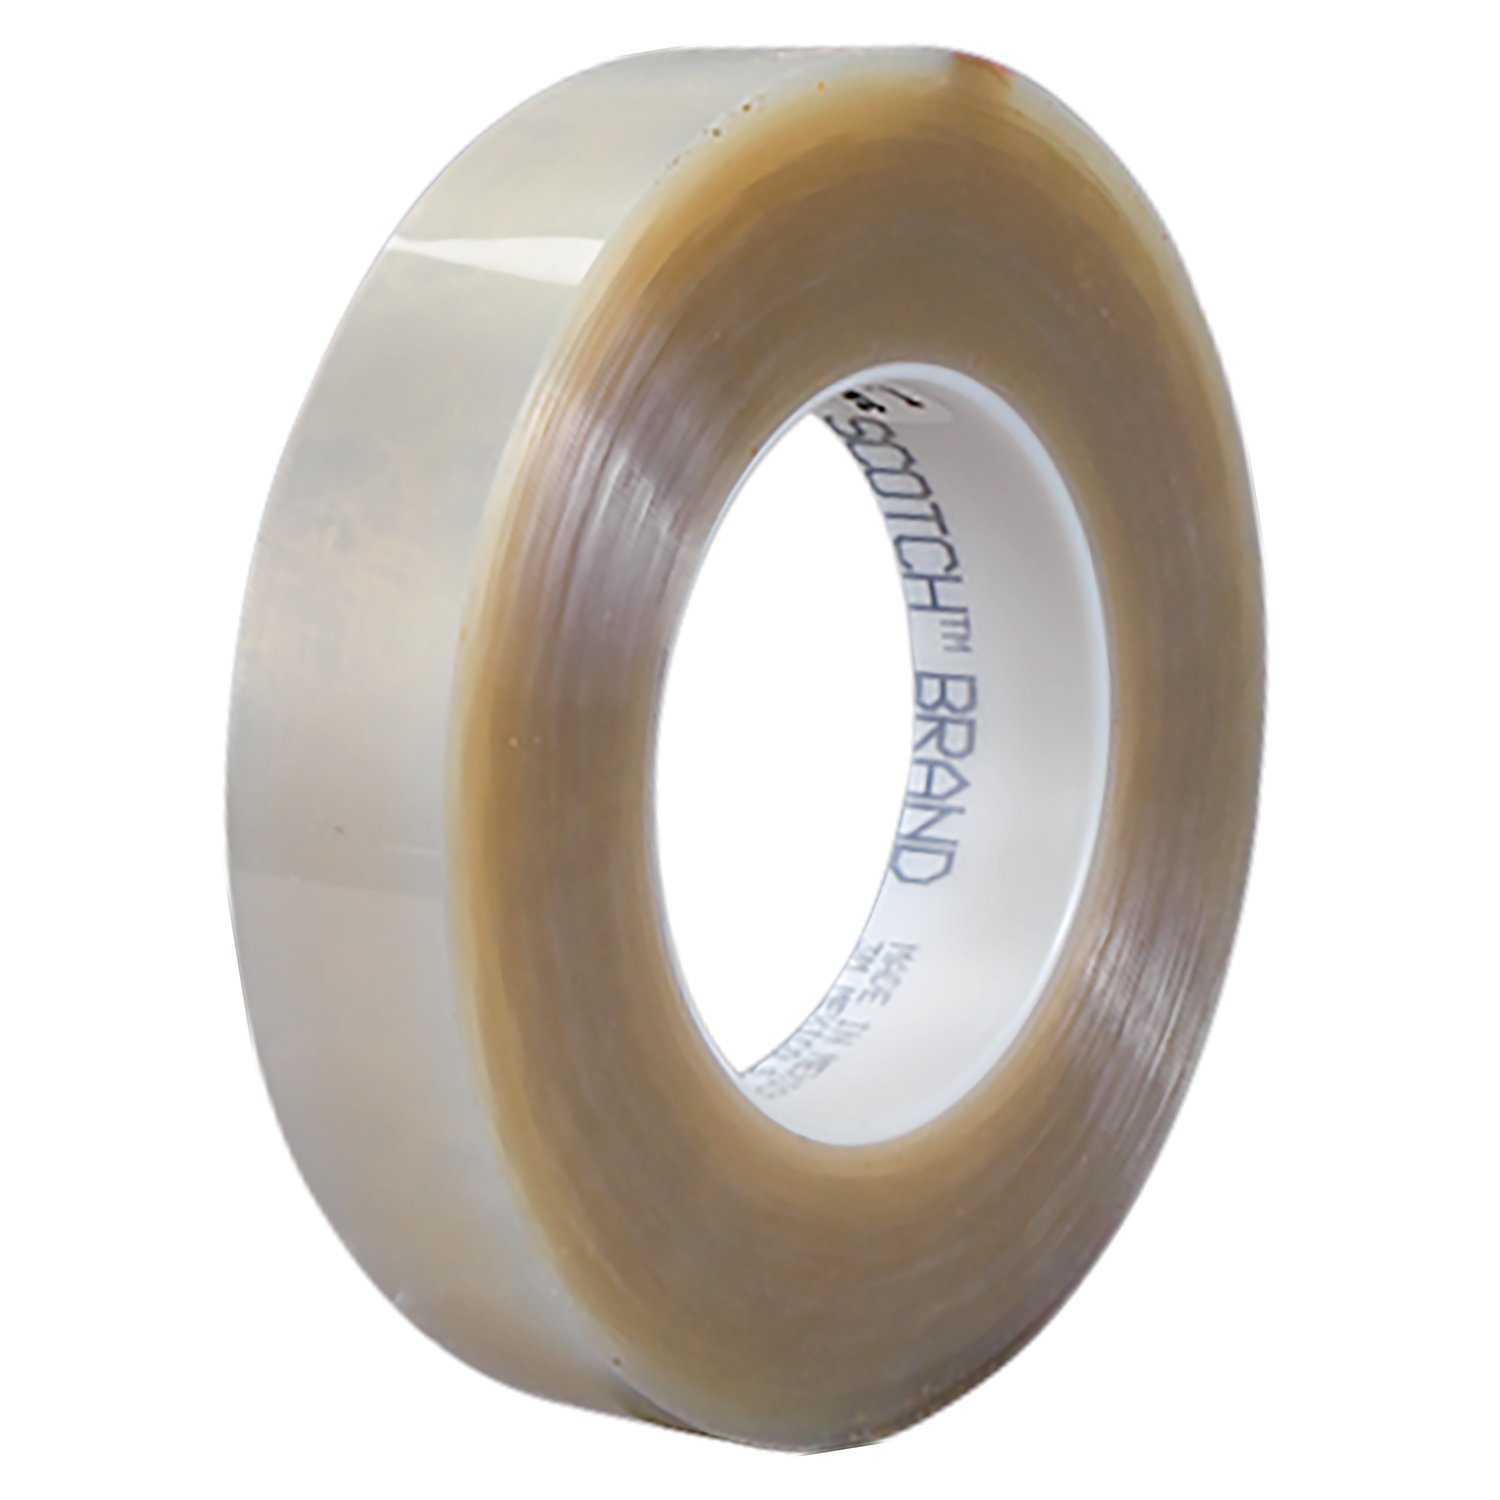 7010048707 - 3M Polyester Tape 8412, Transparent, 4 in x 72 yd, 6.3 mil, 12 rolls
per case